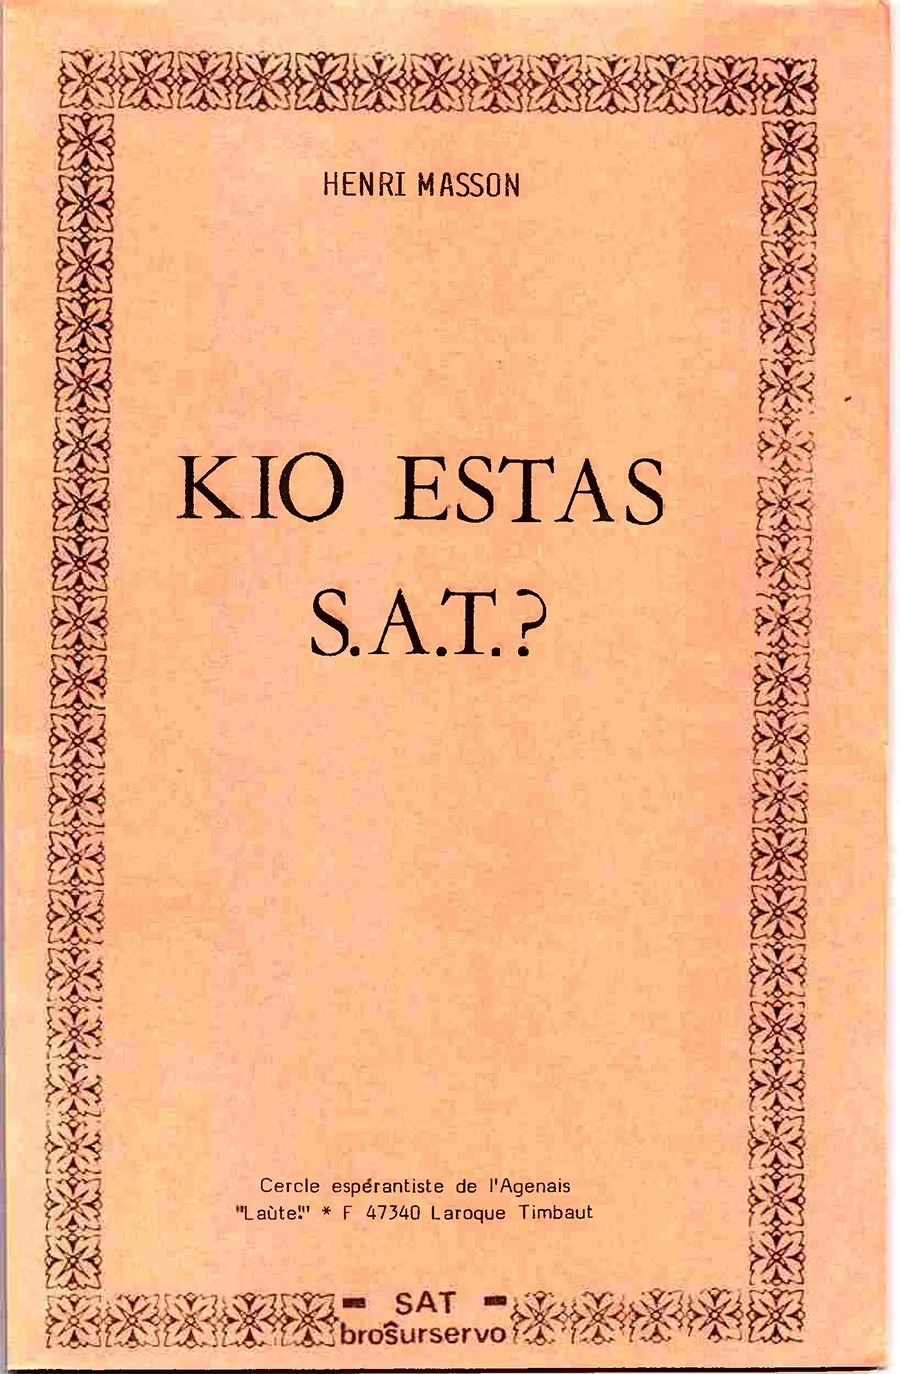 cover of a booklet with a decorative border and title Kio Estas S.A.T?